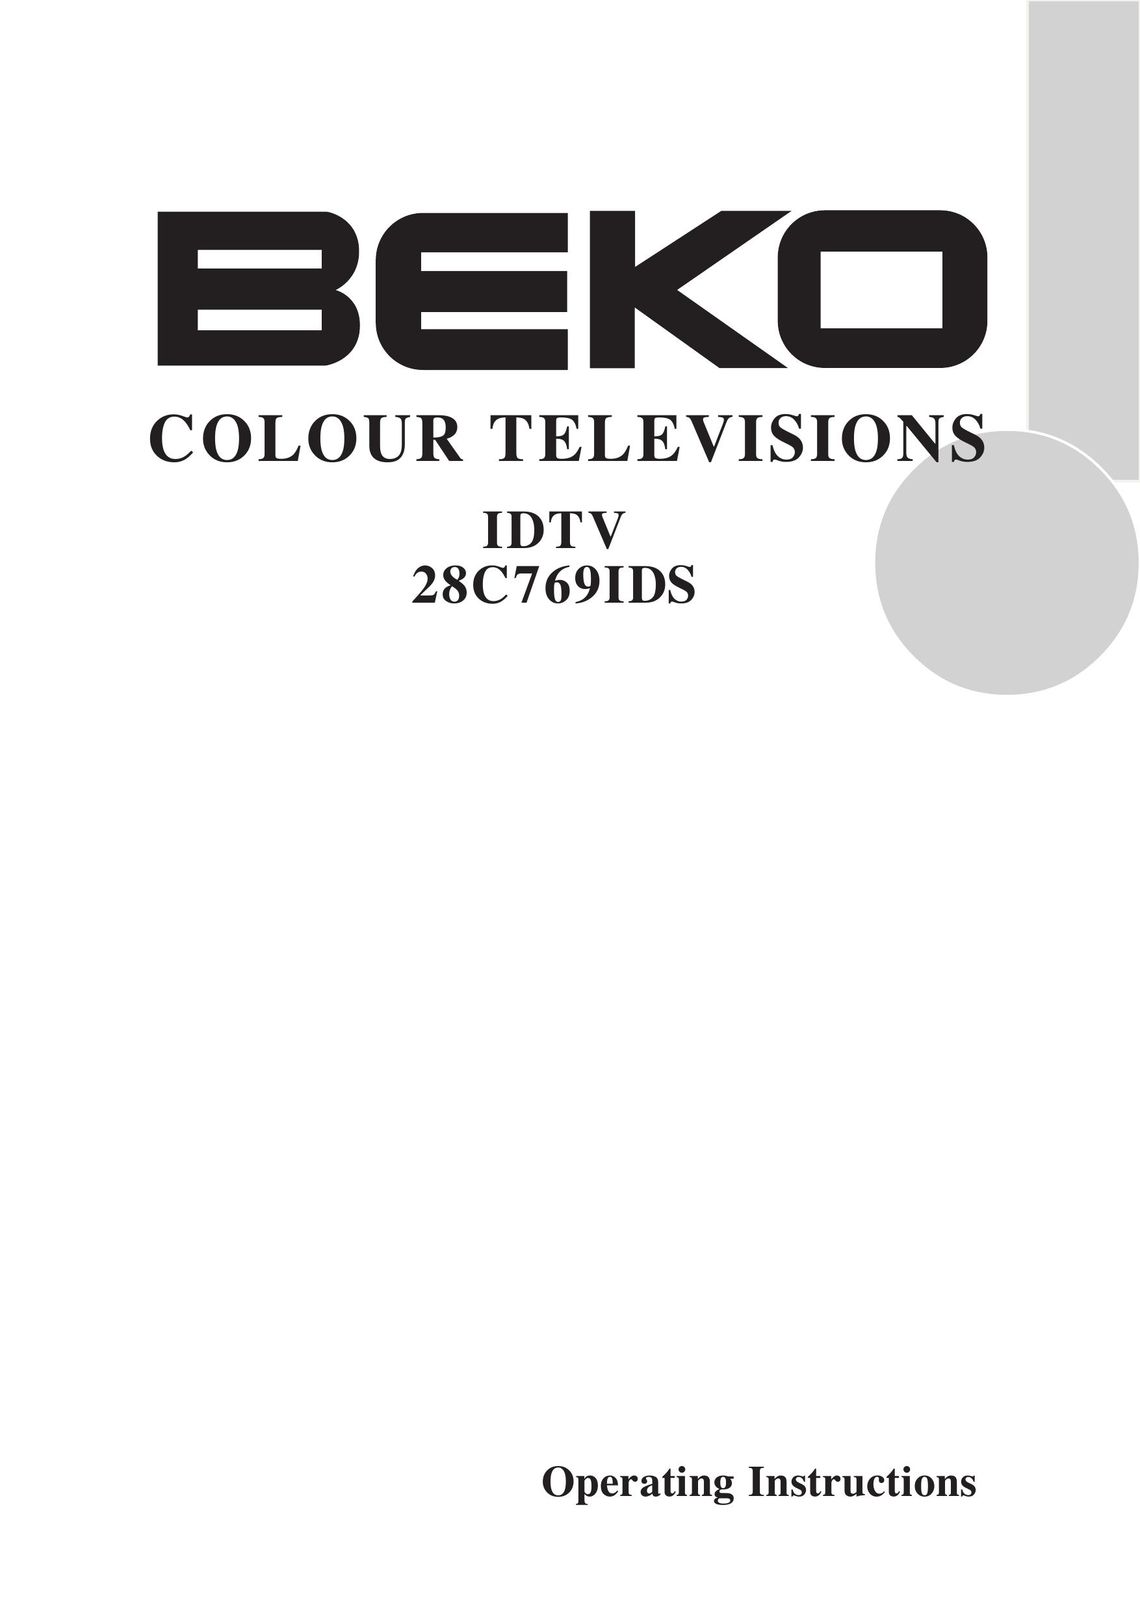 Beko 28C769IDS CRT Television User Manual (Page 1)